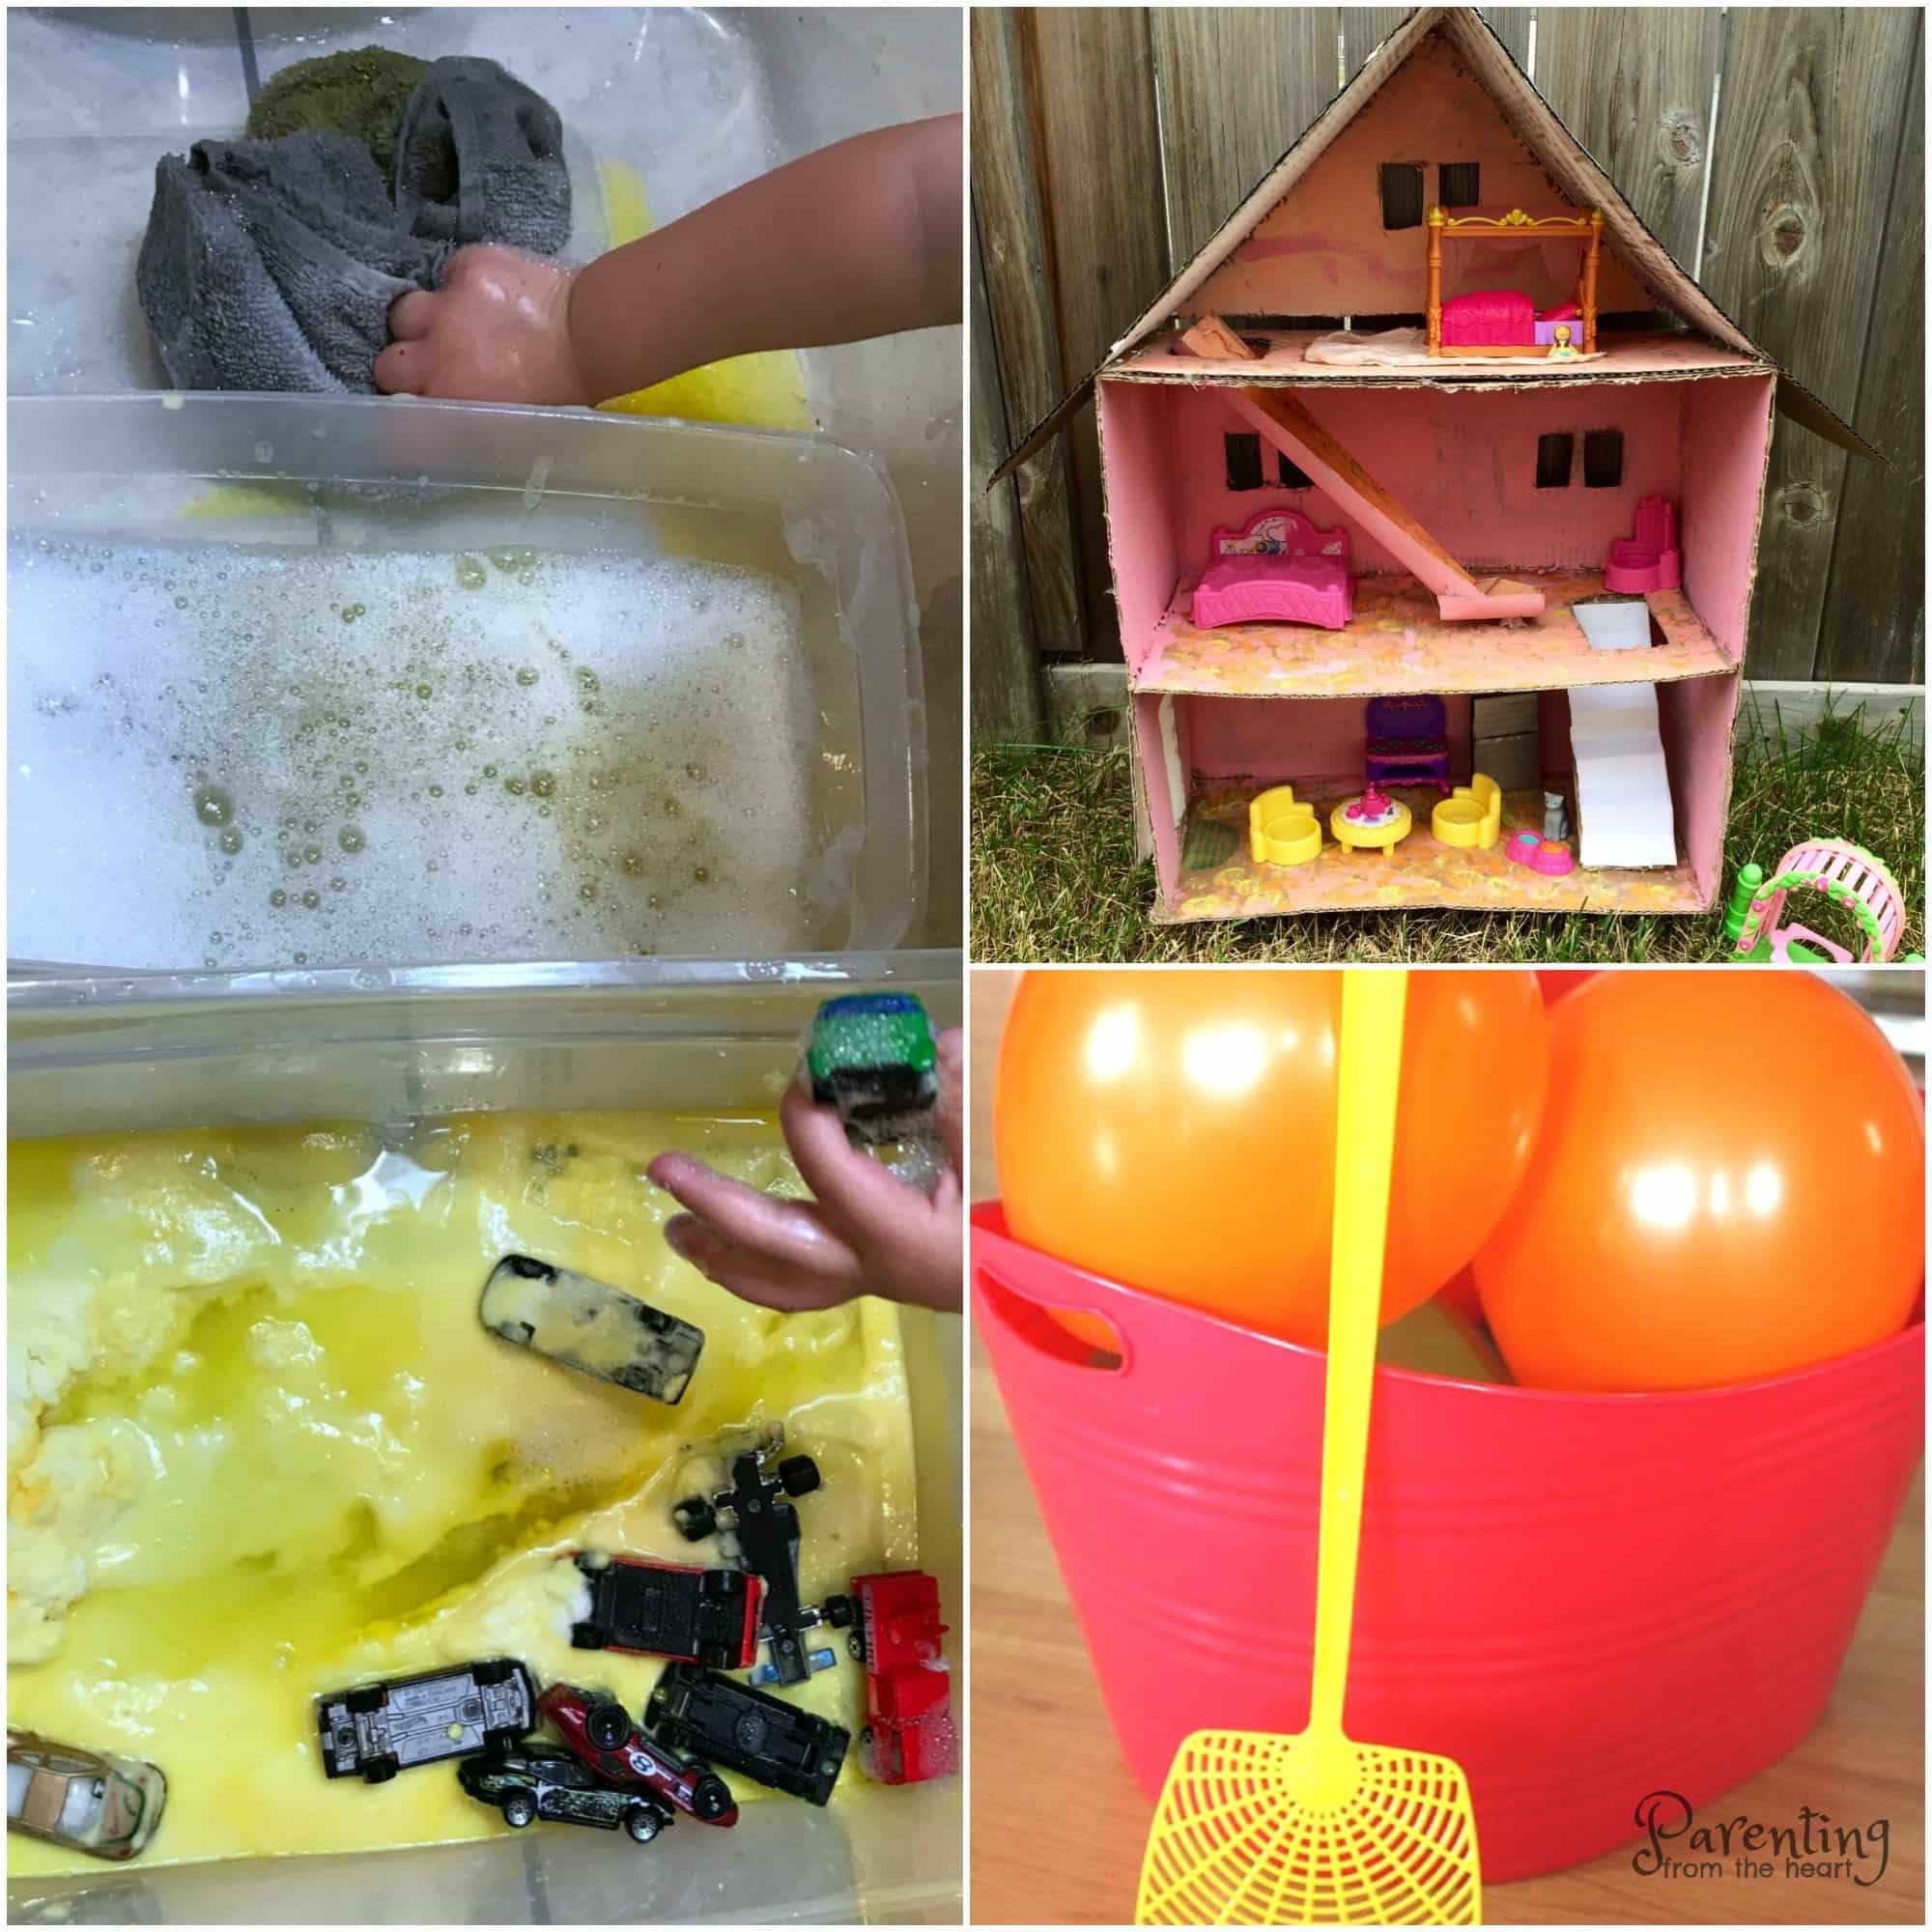 Find awesome rainy day toddler activities. These simple kids activities are fun and wonderful for play-based learning.